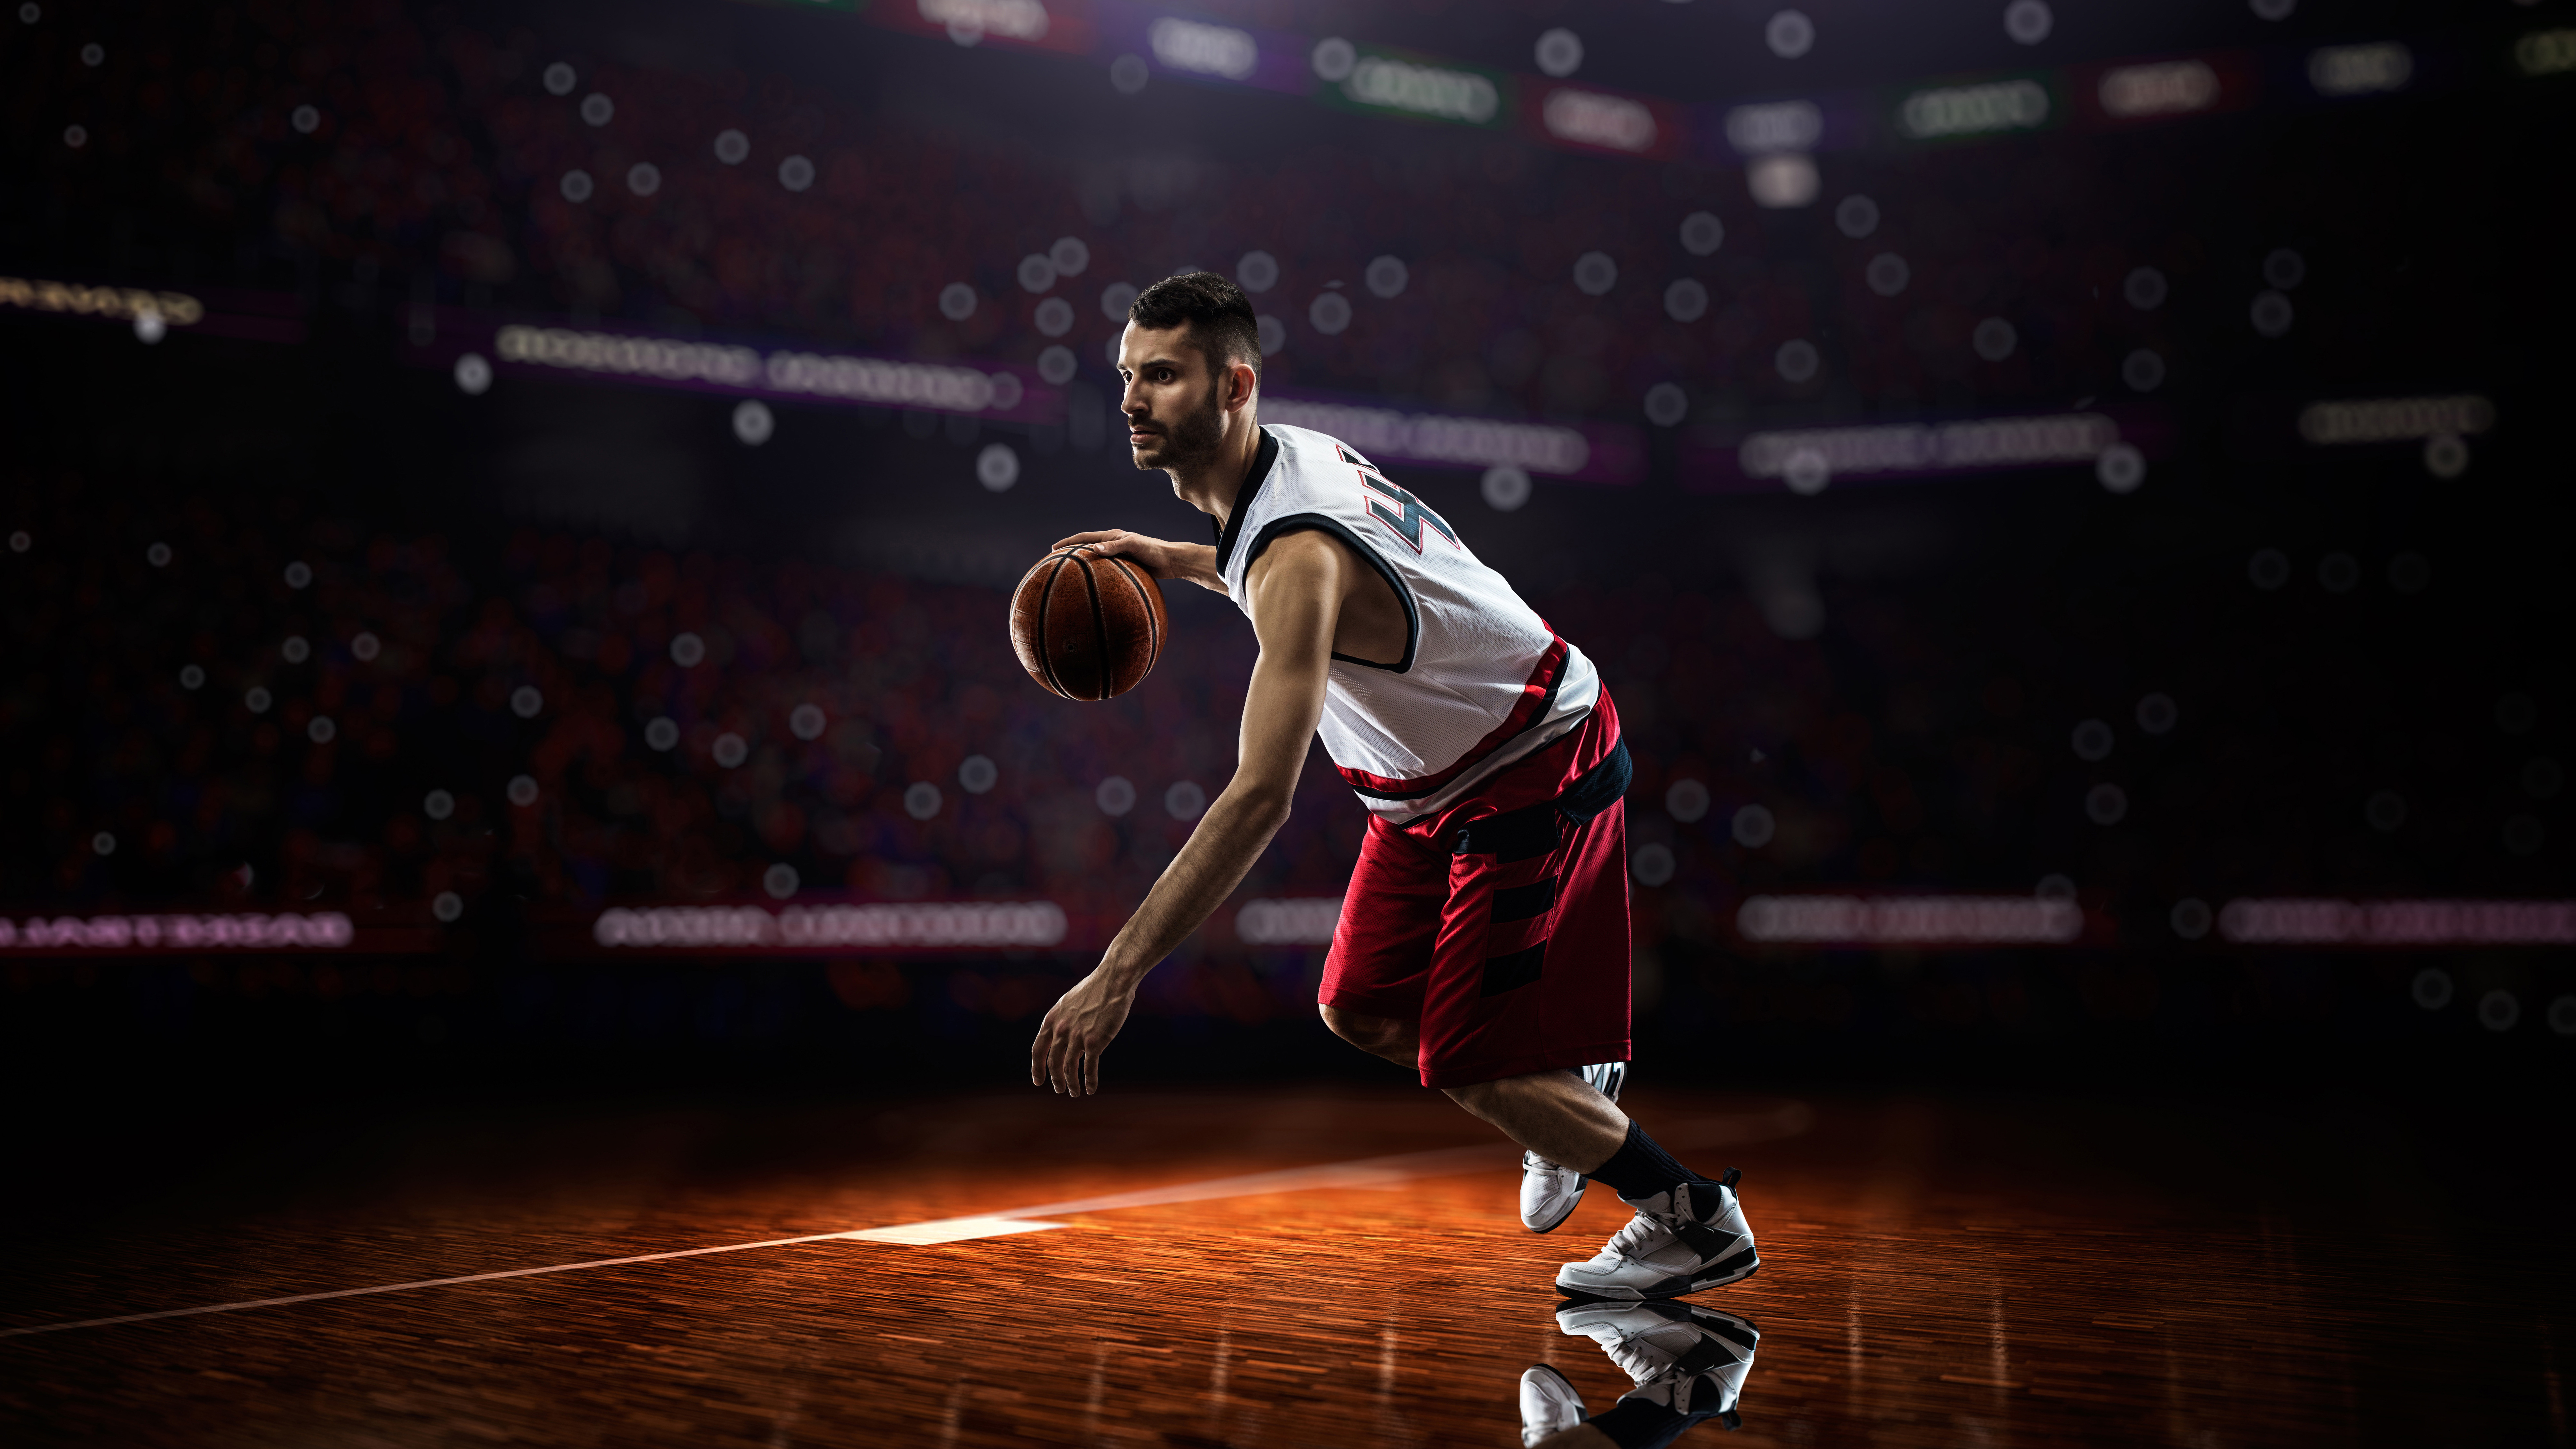 Basketball Player 8k 8k HD 4k Wallpaper, Image, Background, Photo and Picture